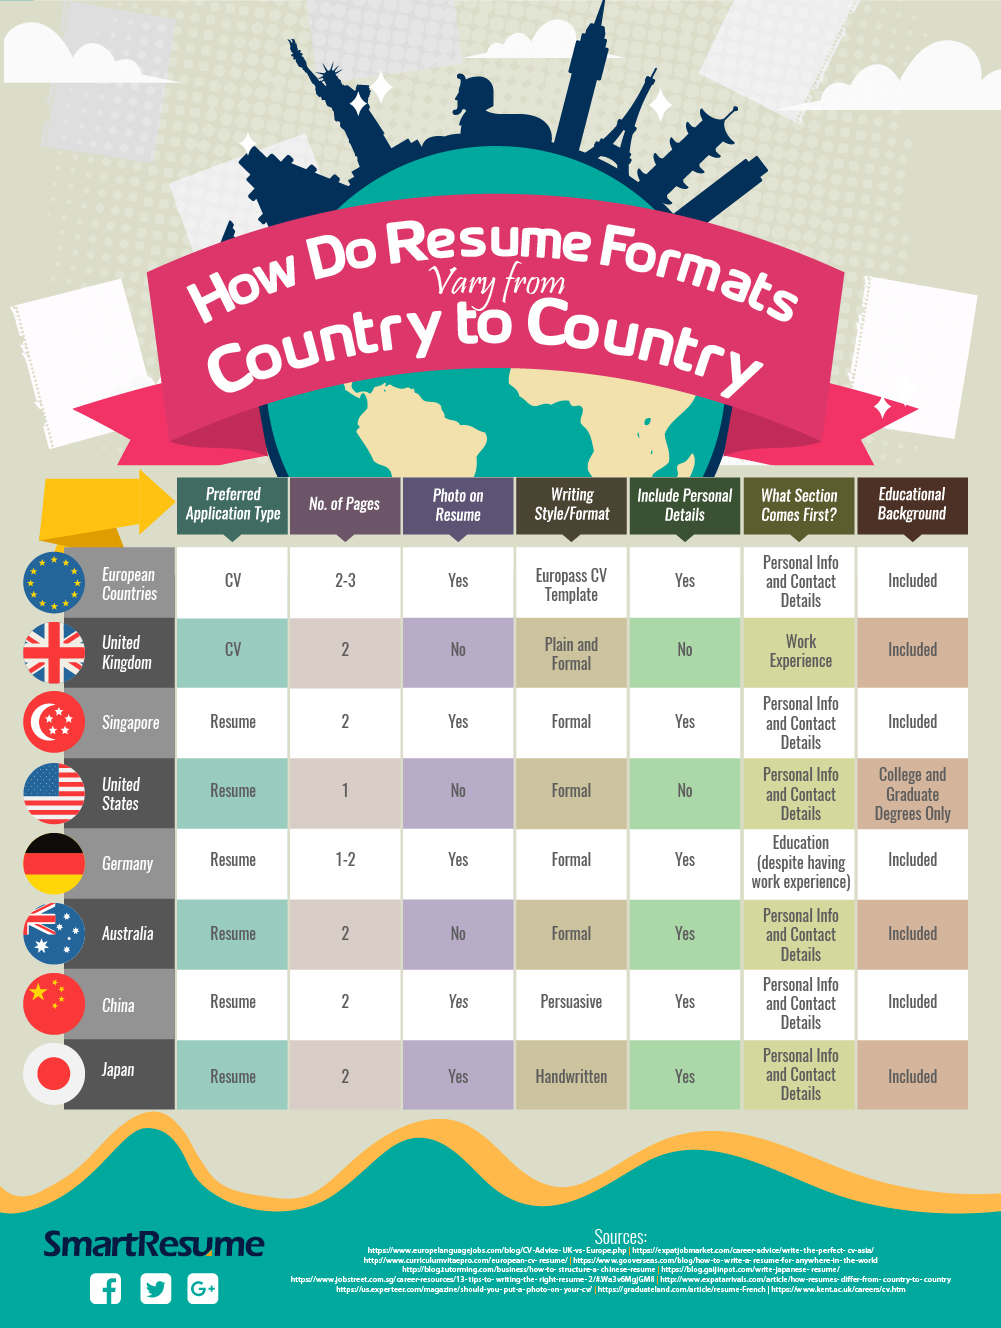 Resume Guidelines for each country